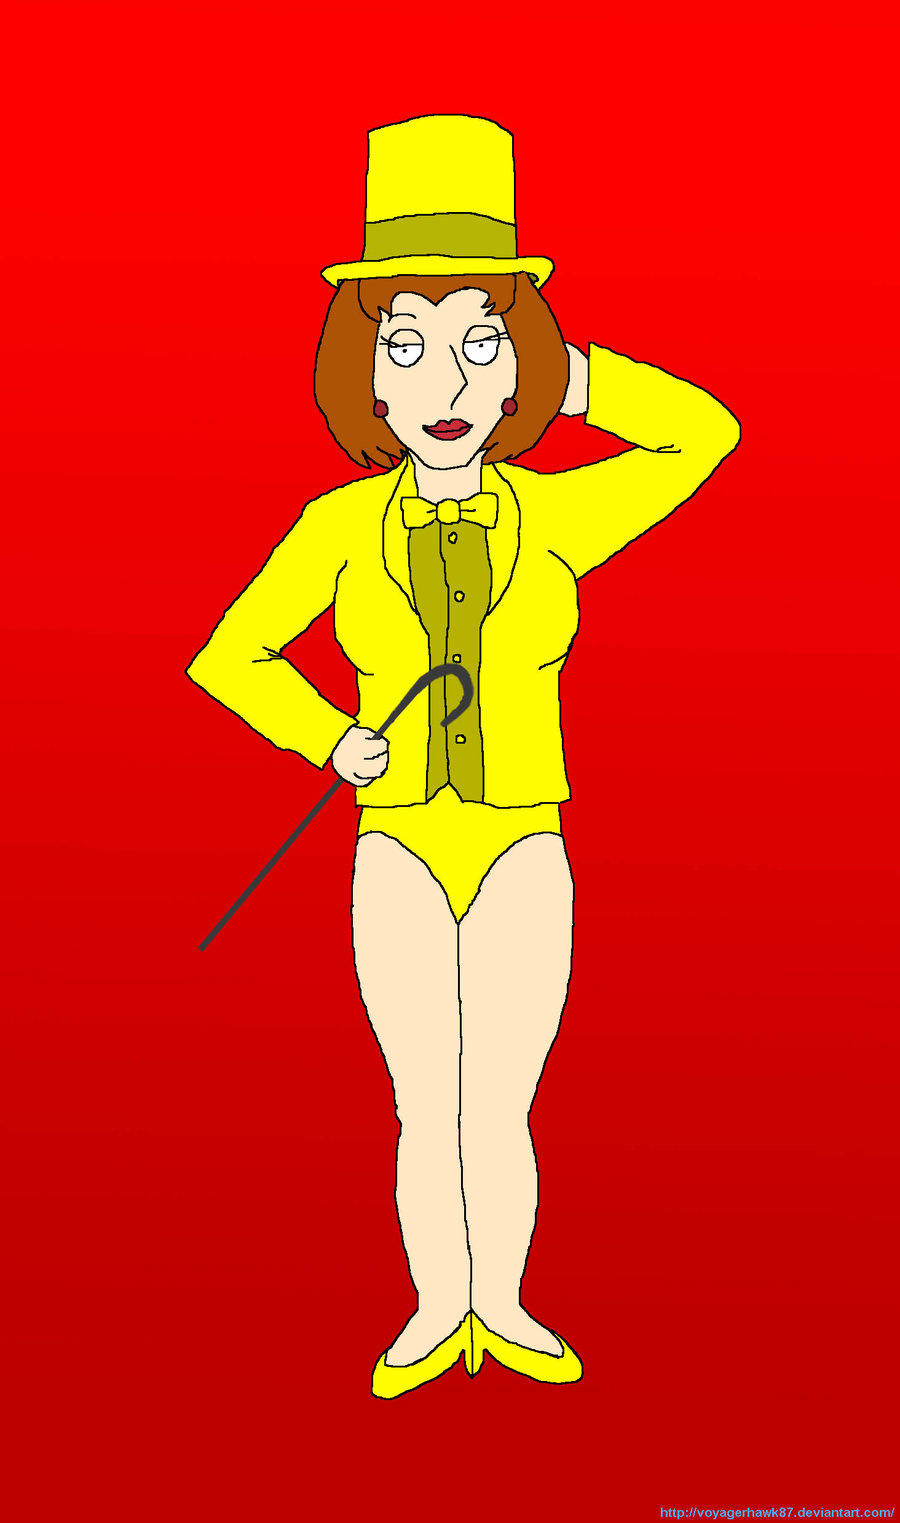 family guy diane simmons sexy diane simmons family guy diane simmons family guy diane